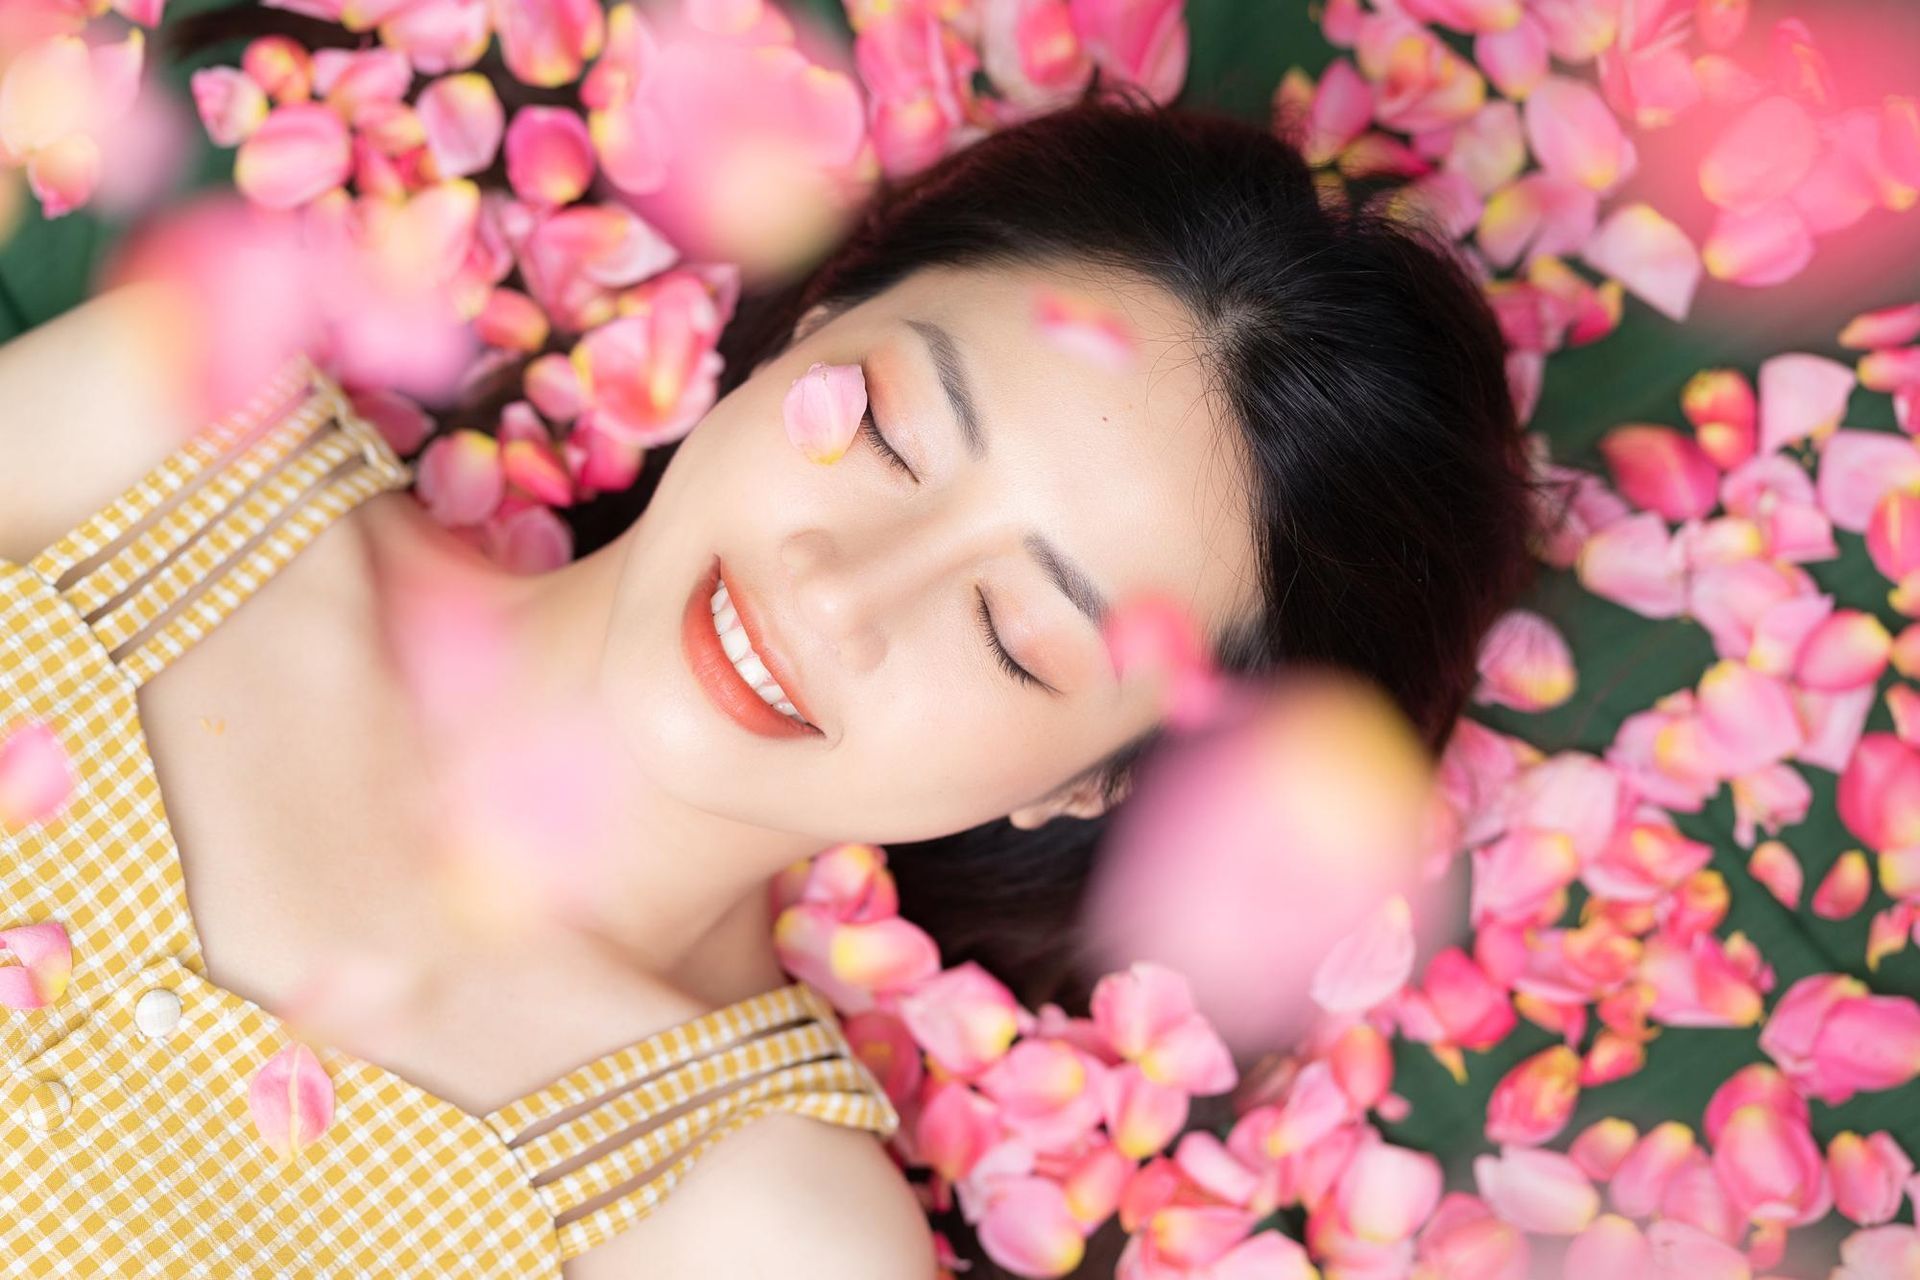 a woman with her eyes closed is surrounded by pink petals